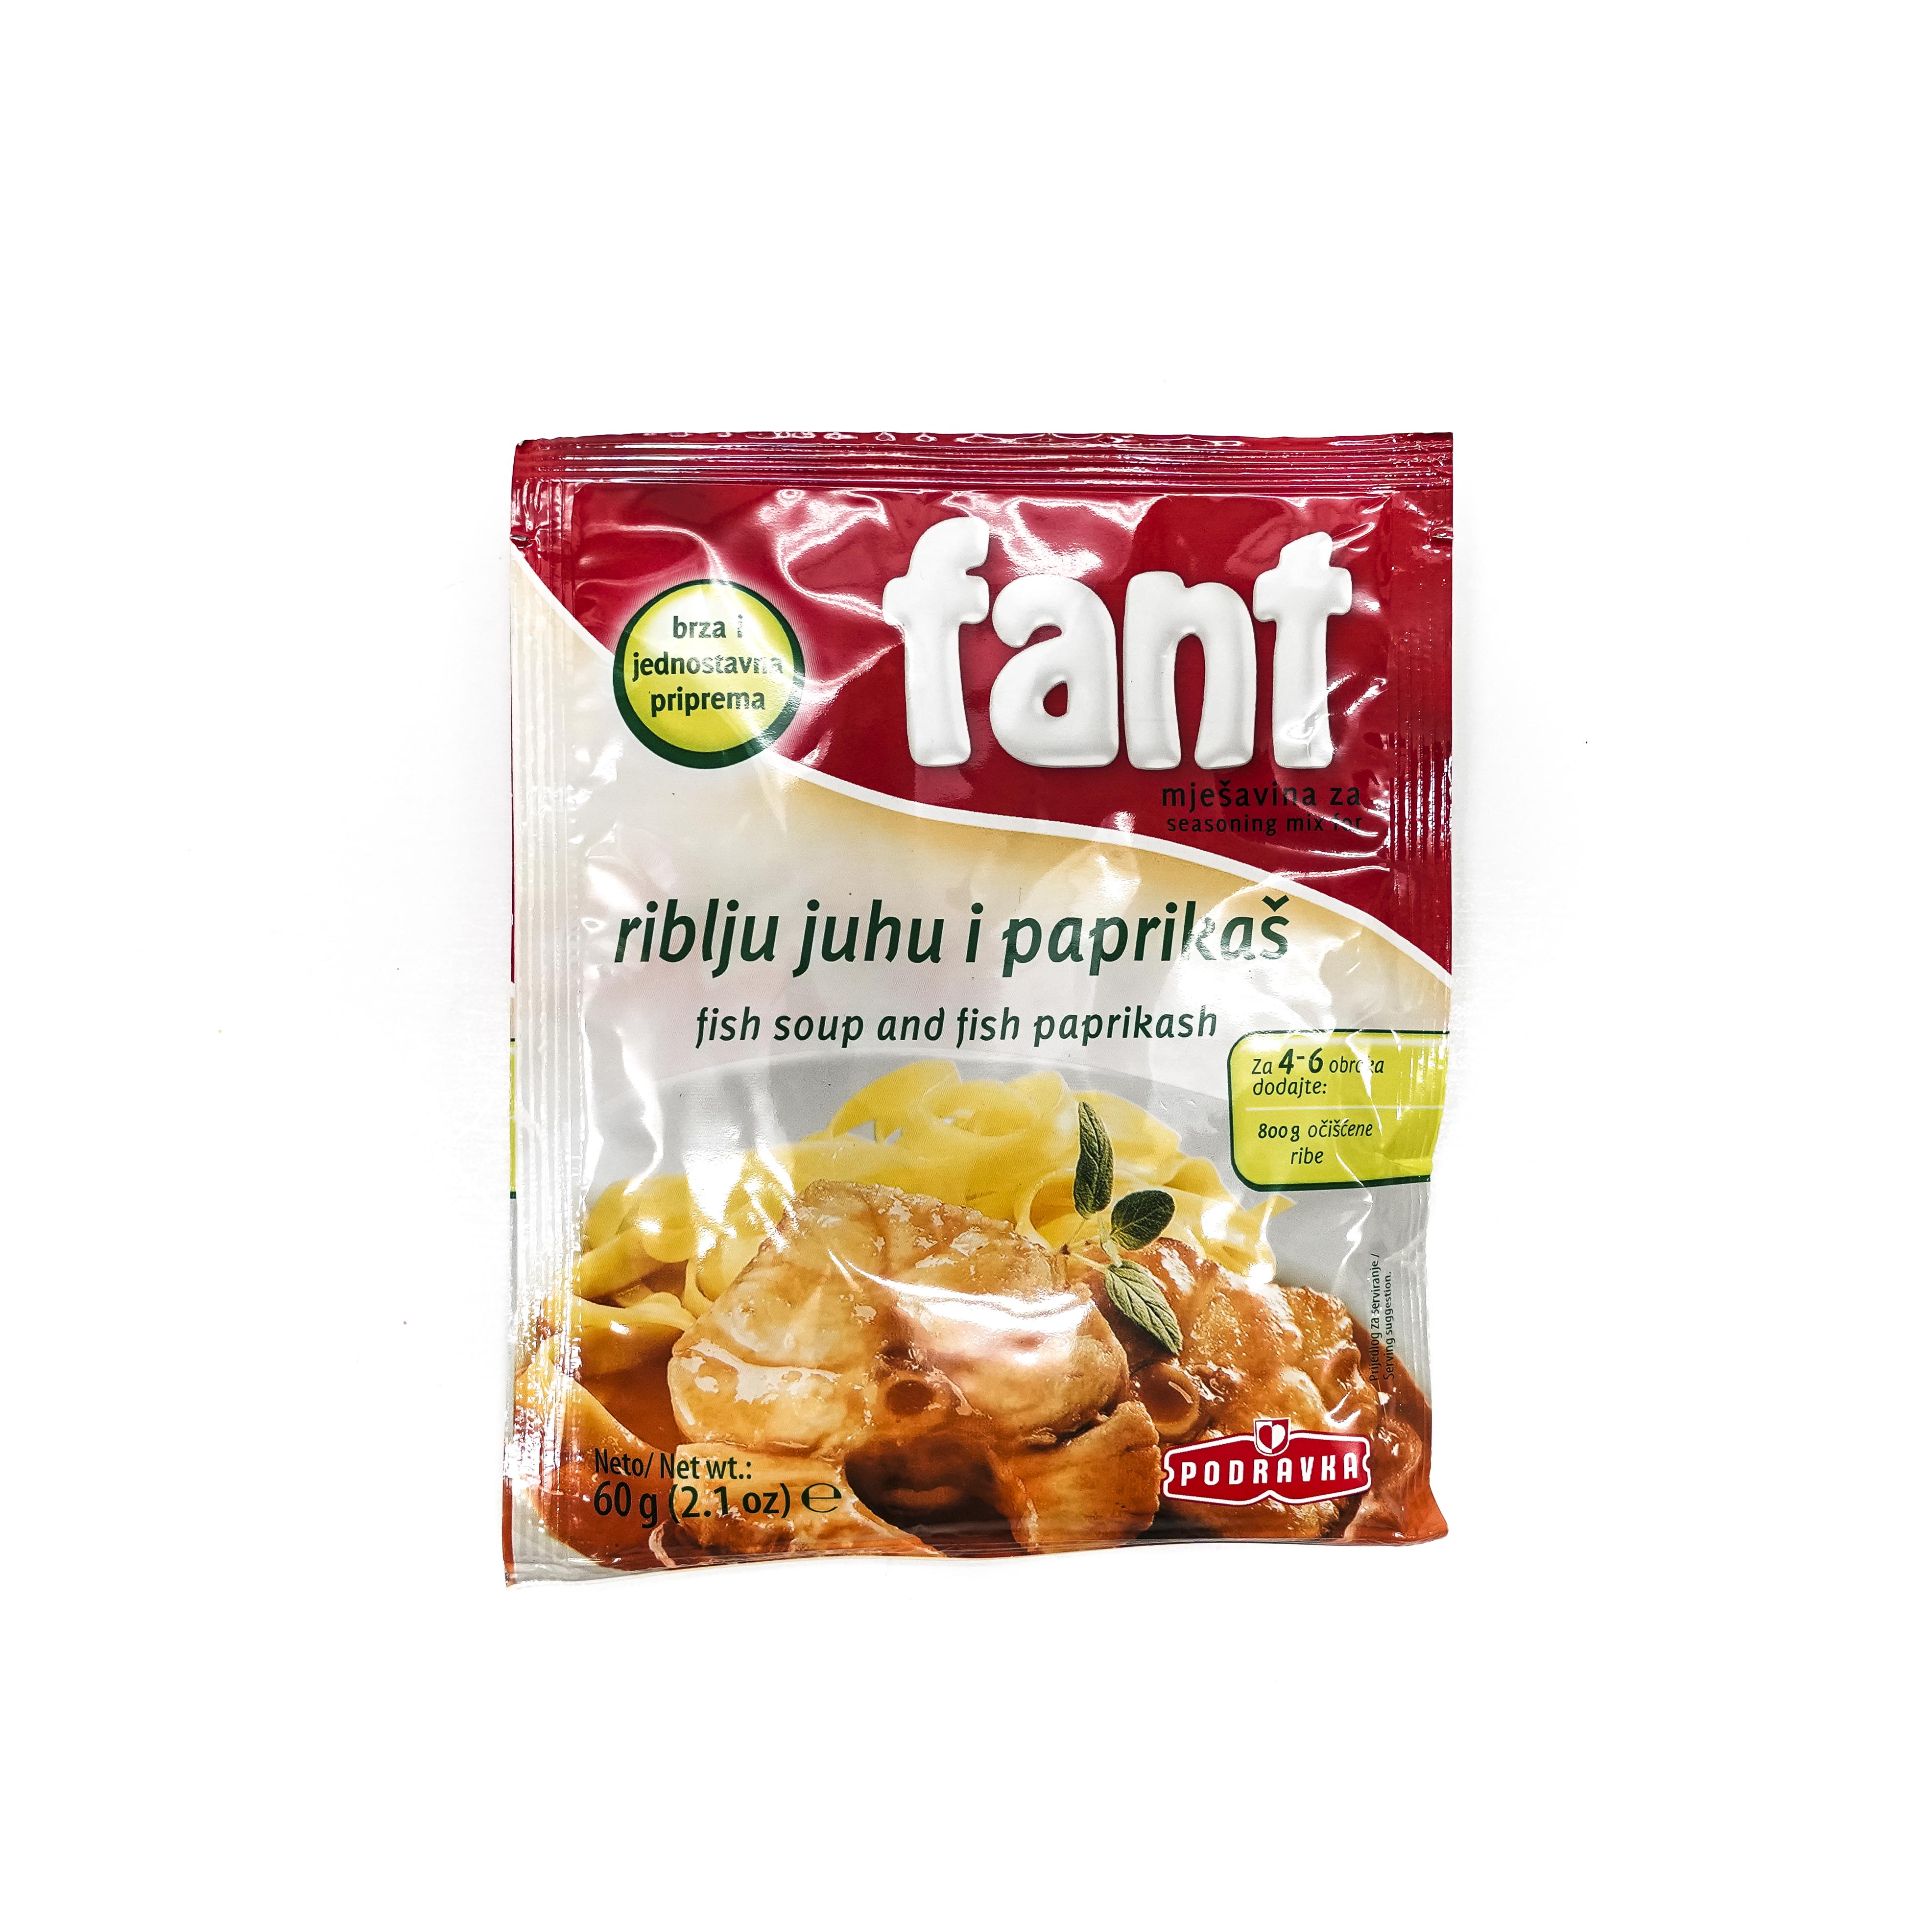 Fant Seasoning Mix for Fish Soup